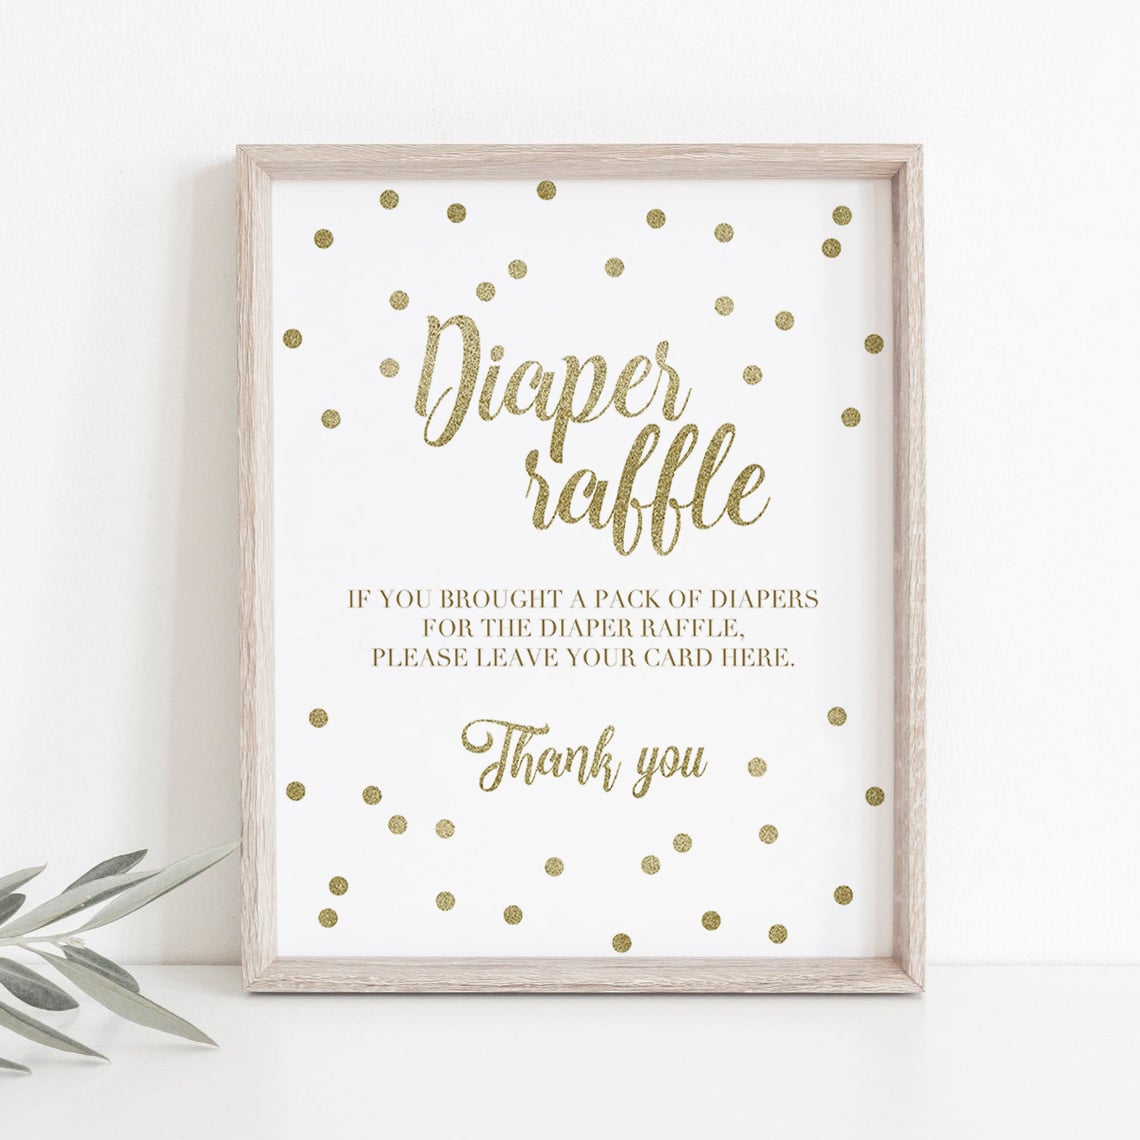 Gold confetti diaper raffle printables by LittleSizzle